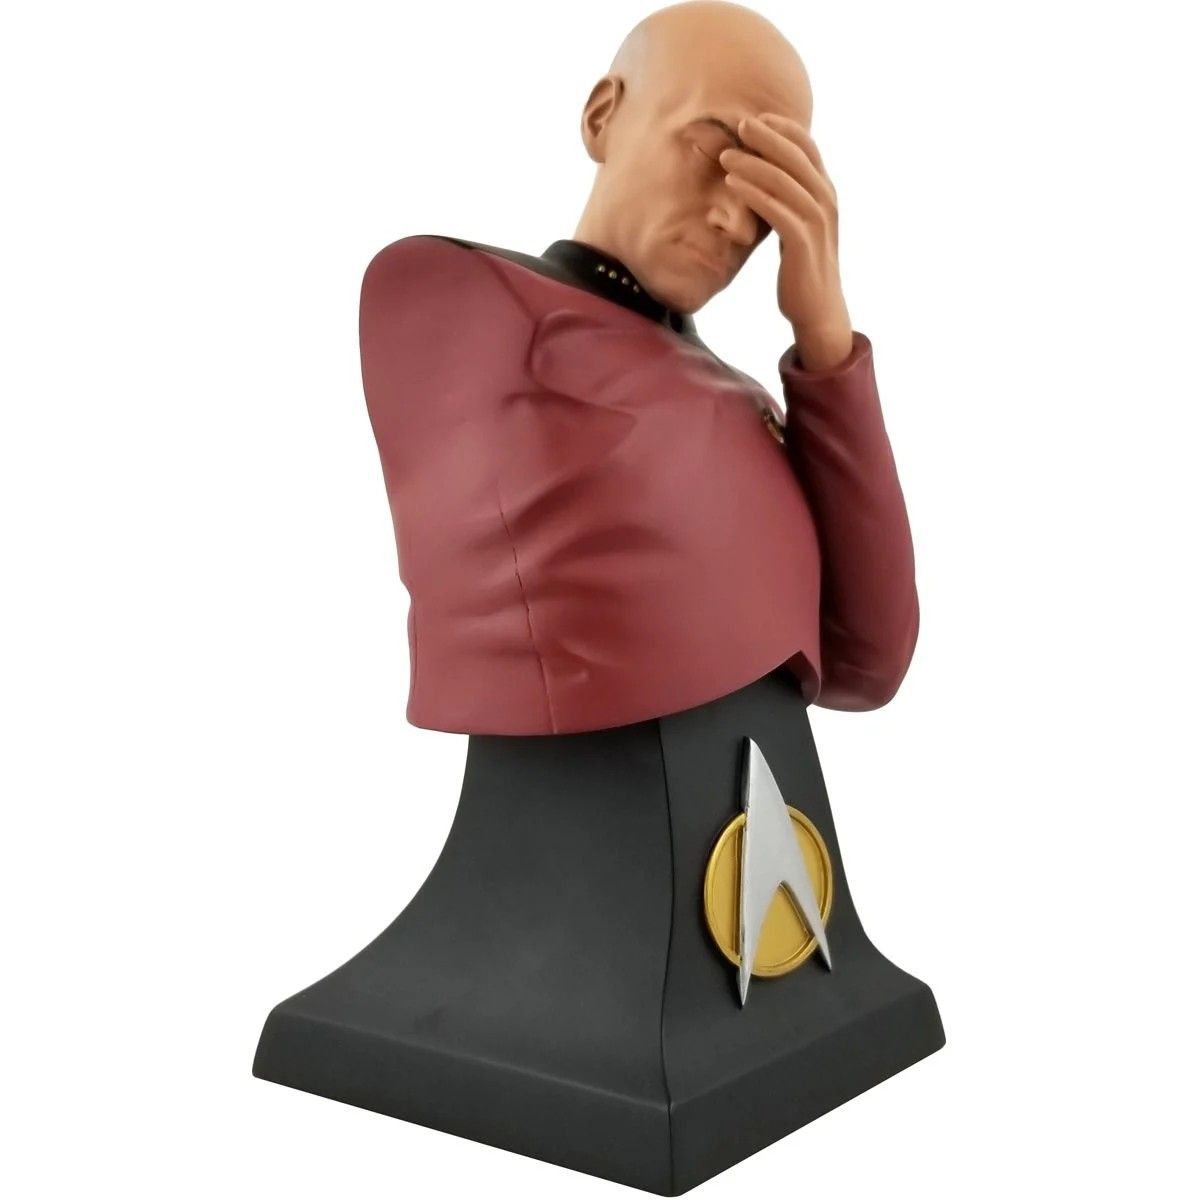 Picard Facepalming Collectible Bust Side View